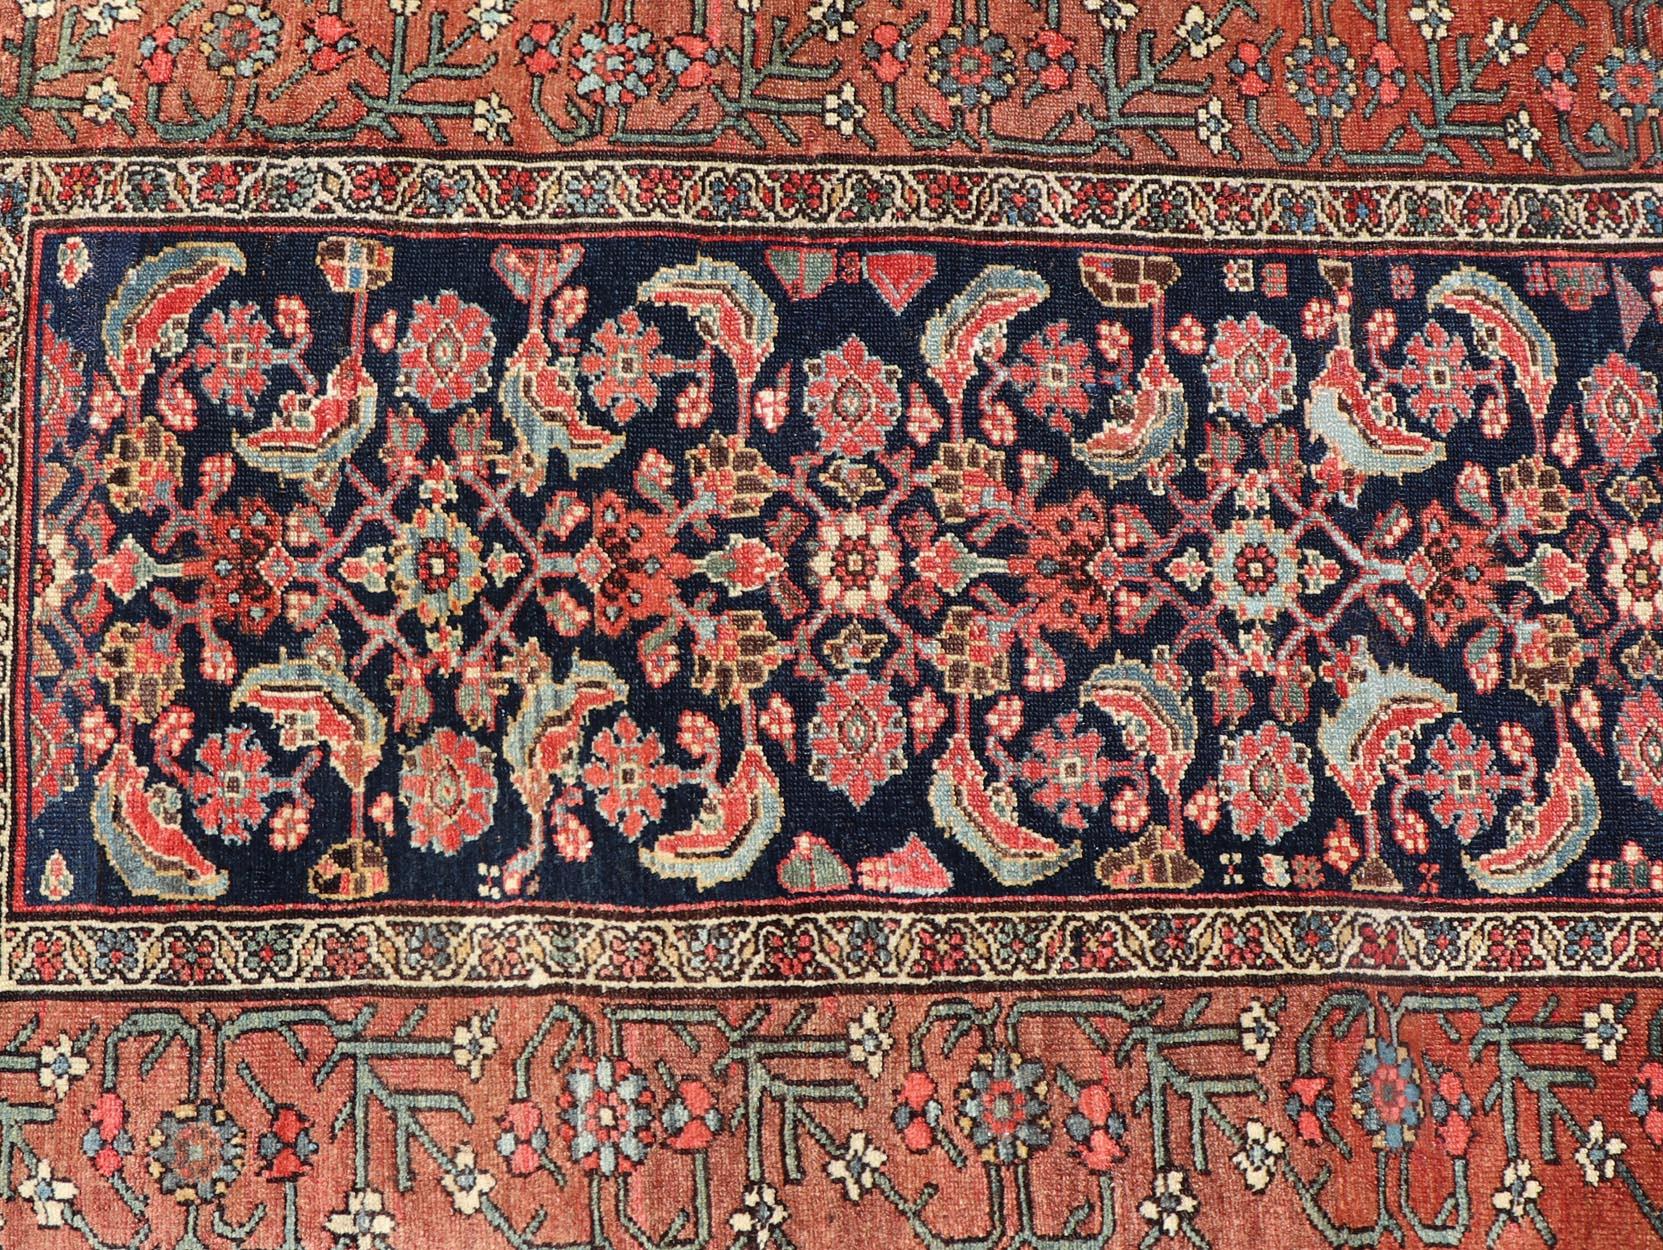 Antique Persian Gallery Malayer Runner in Blue Background with Multi Colors. Keivan Woven Arts / rug EMB-22147-15078, country of origin / type: Iran / Malayer, circa 1910
Measures: 3'6 x 12'7 
This antique Persian Malayer is bright and bold, with a